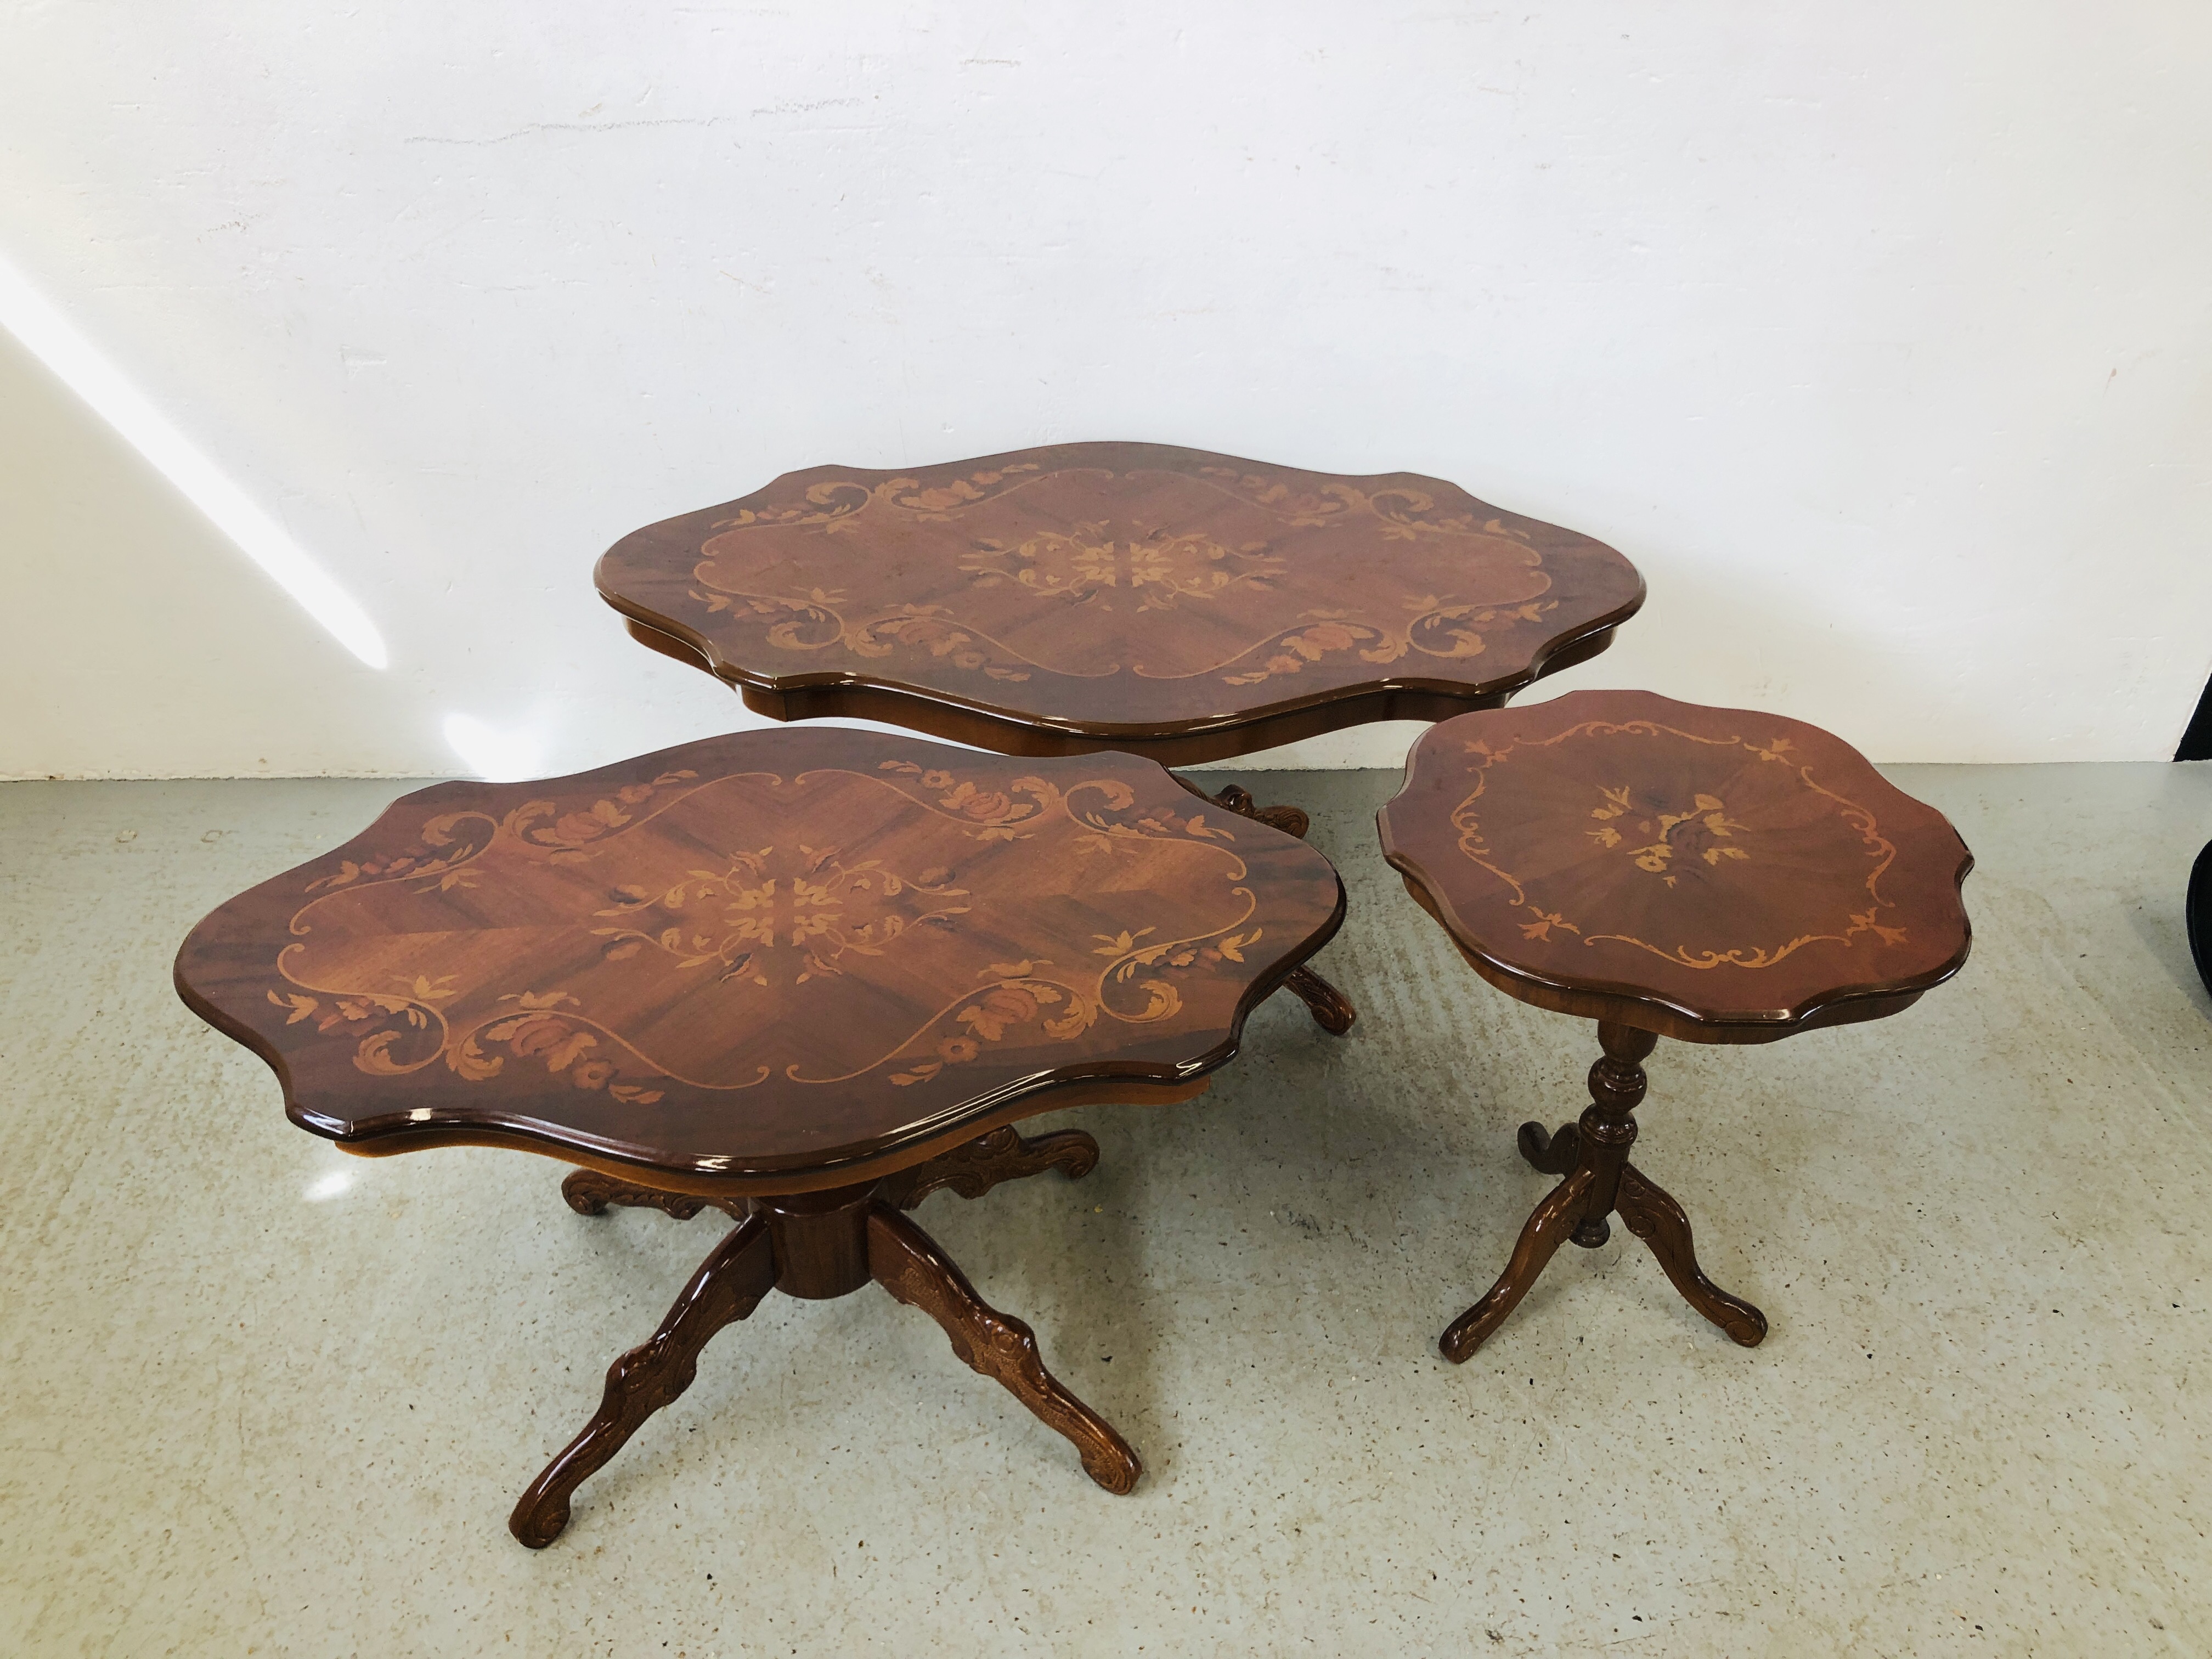 TWO REPRODUCTION ITALIAN SINGLE PEDESTAL STYLE OCCASIONAL TABLES